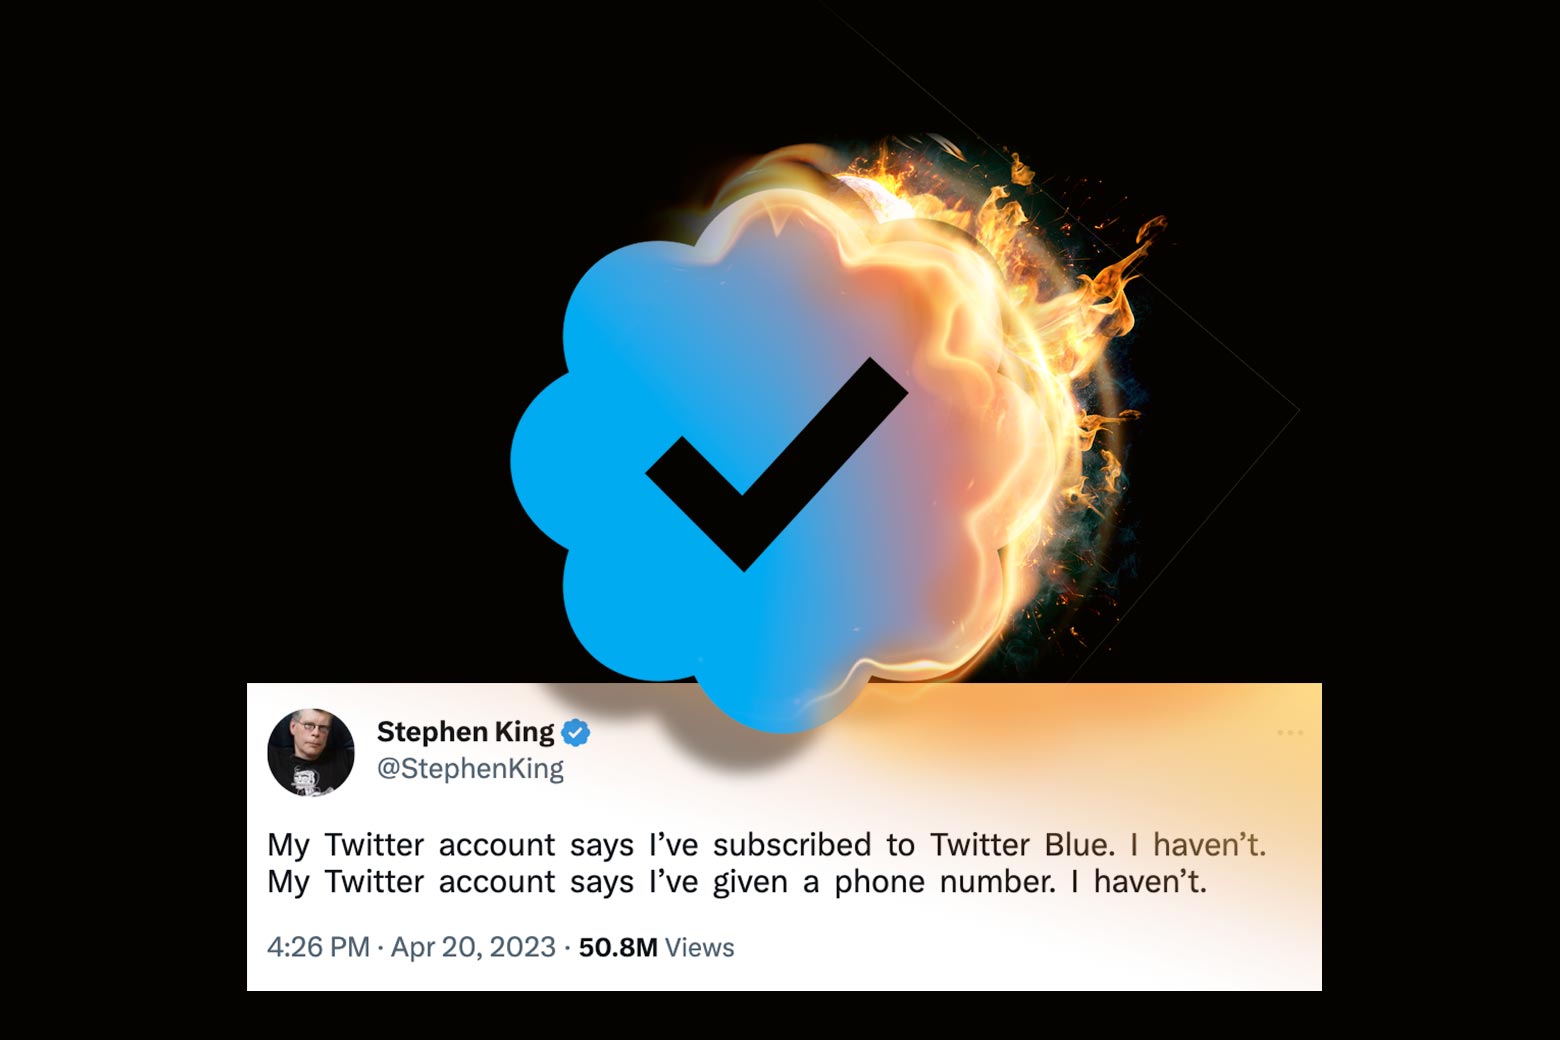 A blue check mark on fire. In the background is a screenshot of a tweet from Stephen King that says “My Twitter account says I've subscribed to Twitter Blue. I haven't. My Twitter account says I've given a phone number. I haven't.”